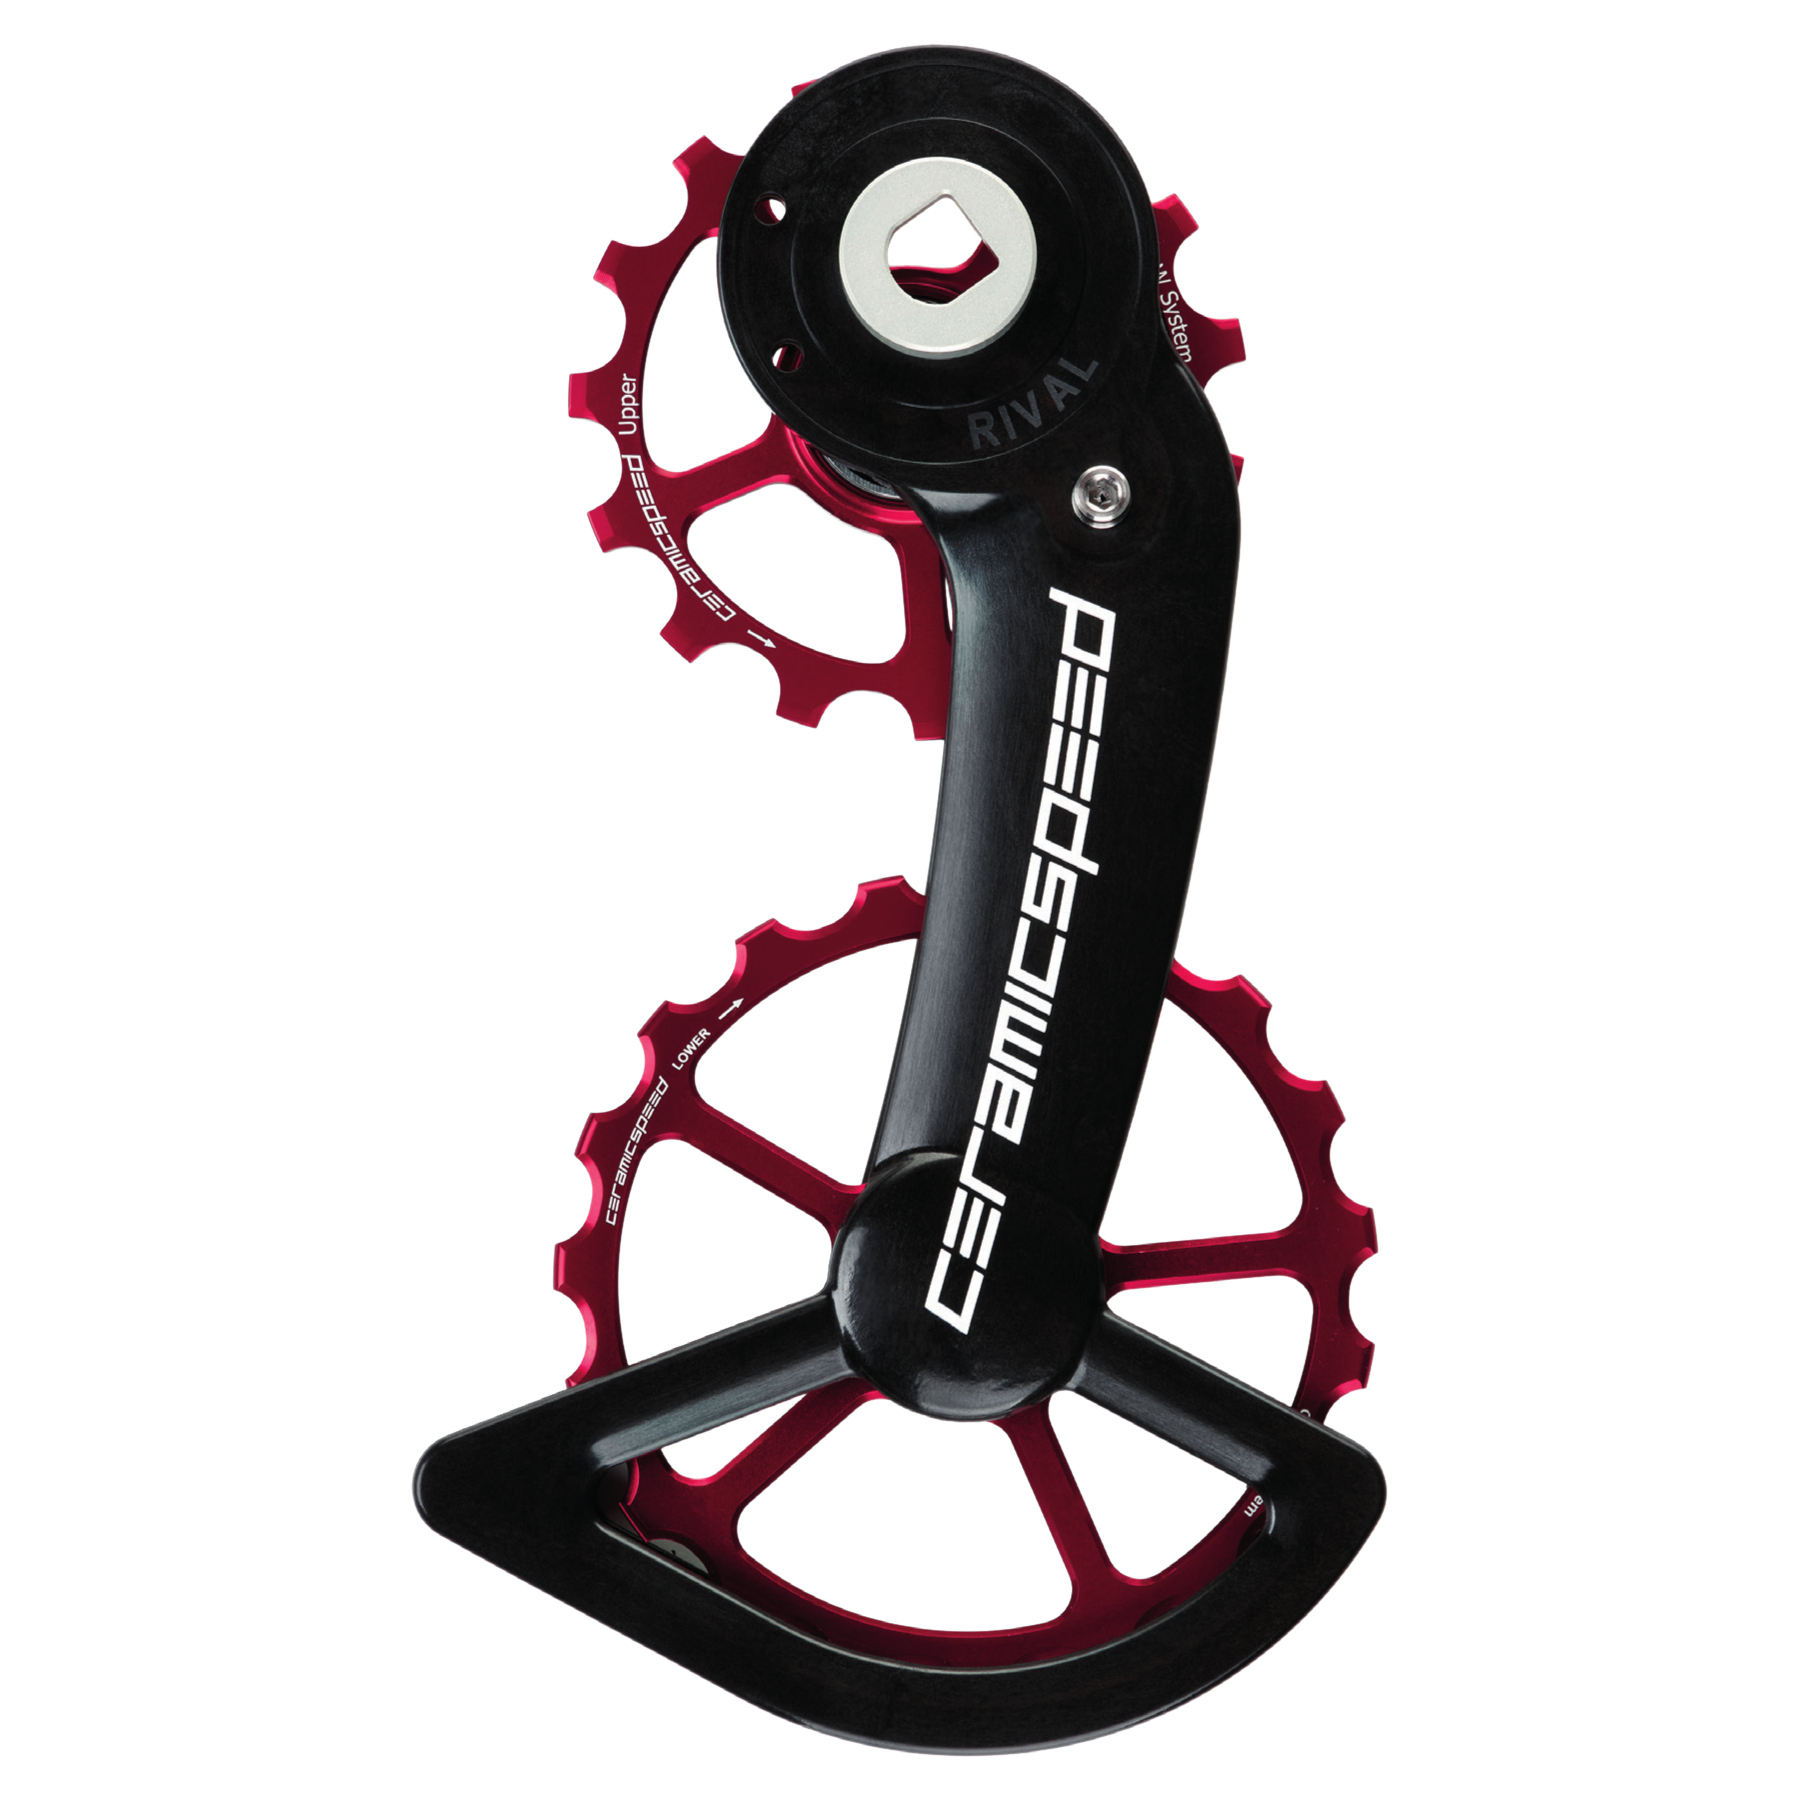 Picture of CeramicSpeed OSPW Derailleur Pulley System - for SRAM Rival AXS | 15/19 Teeth - Alternative Red